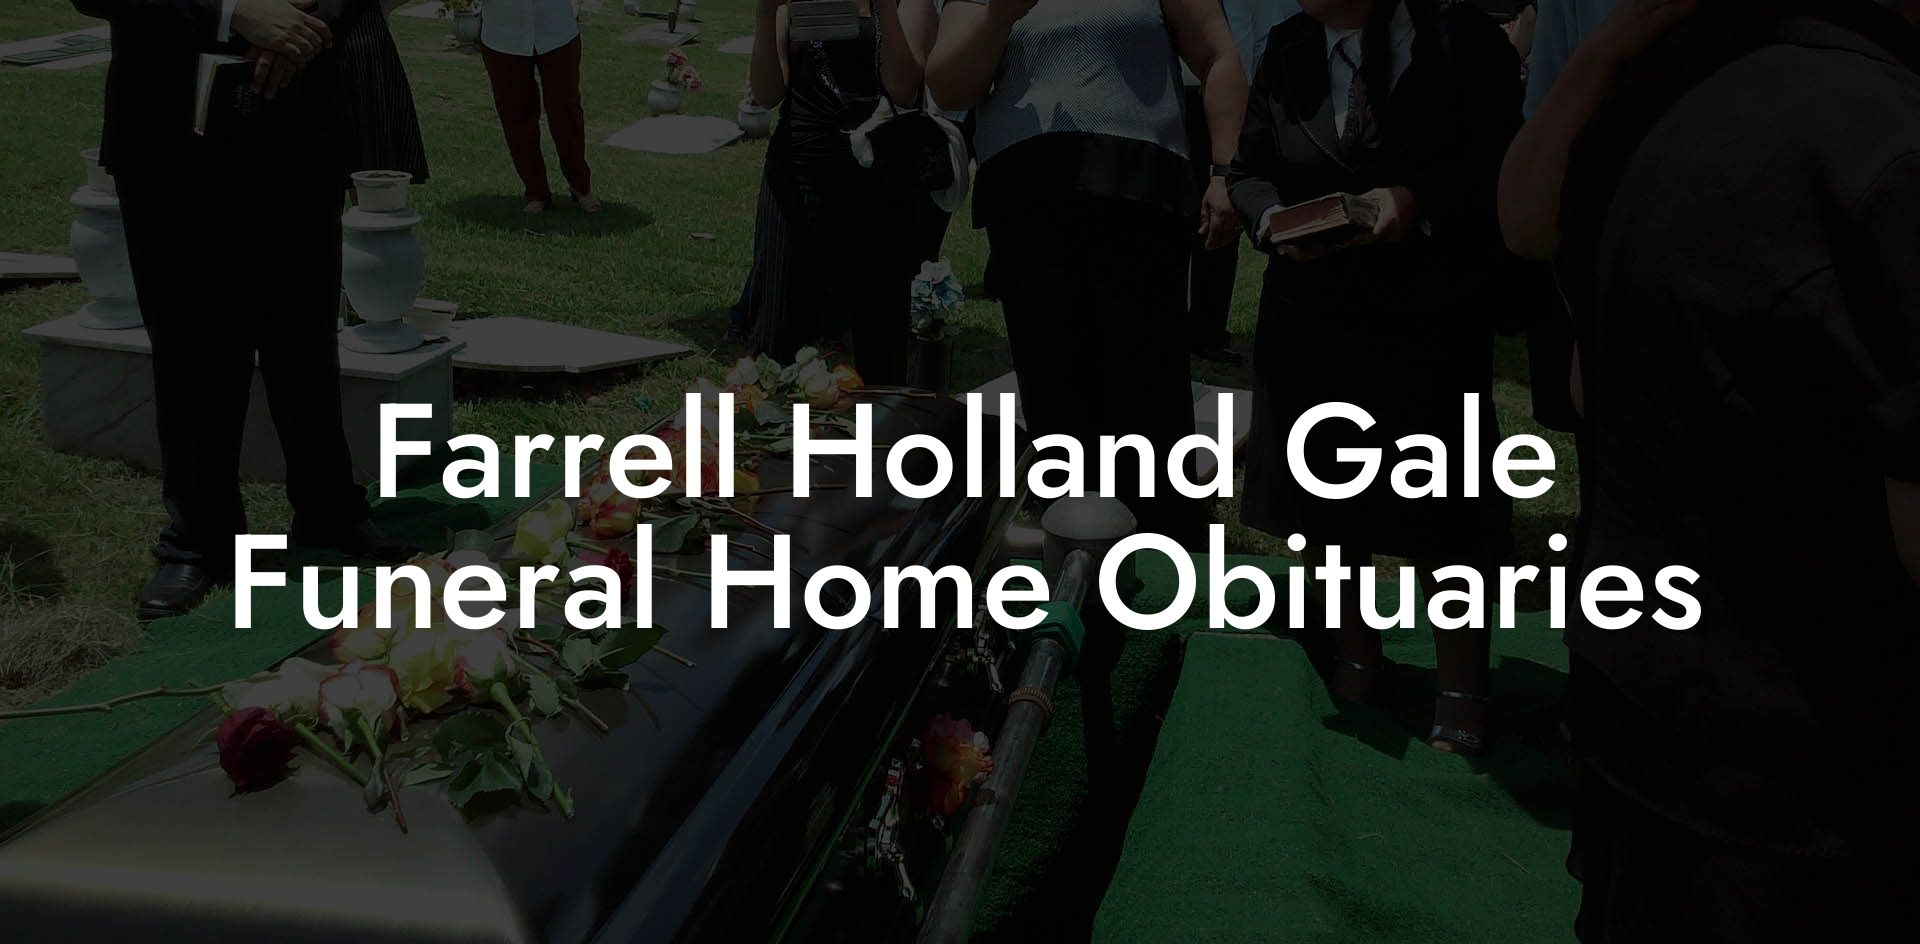 Farrell Holland Gale Funeral Home Obituaries